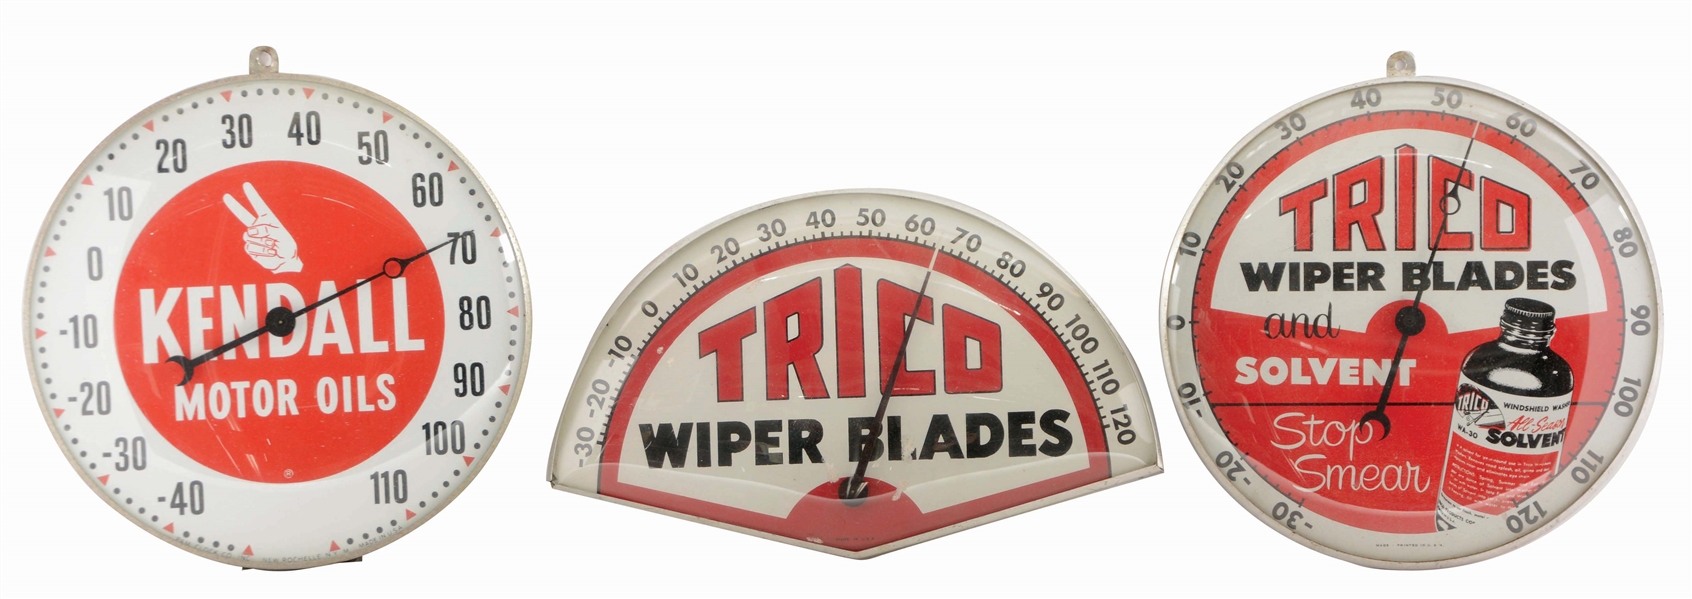 LOT OF THREE: KENDALL MOTOR OILS & TRICO WIPER BLADES GLASS FACE THERMOMETERS.